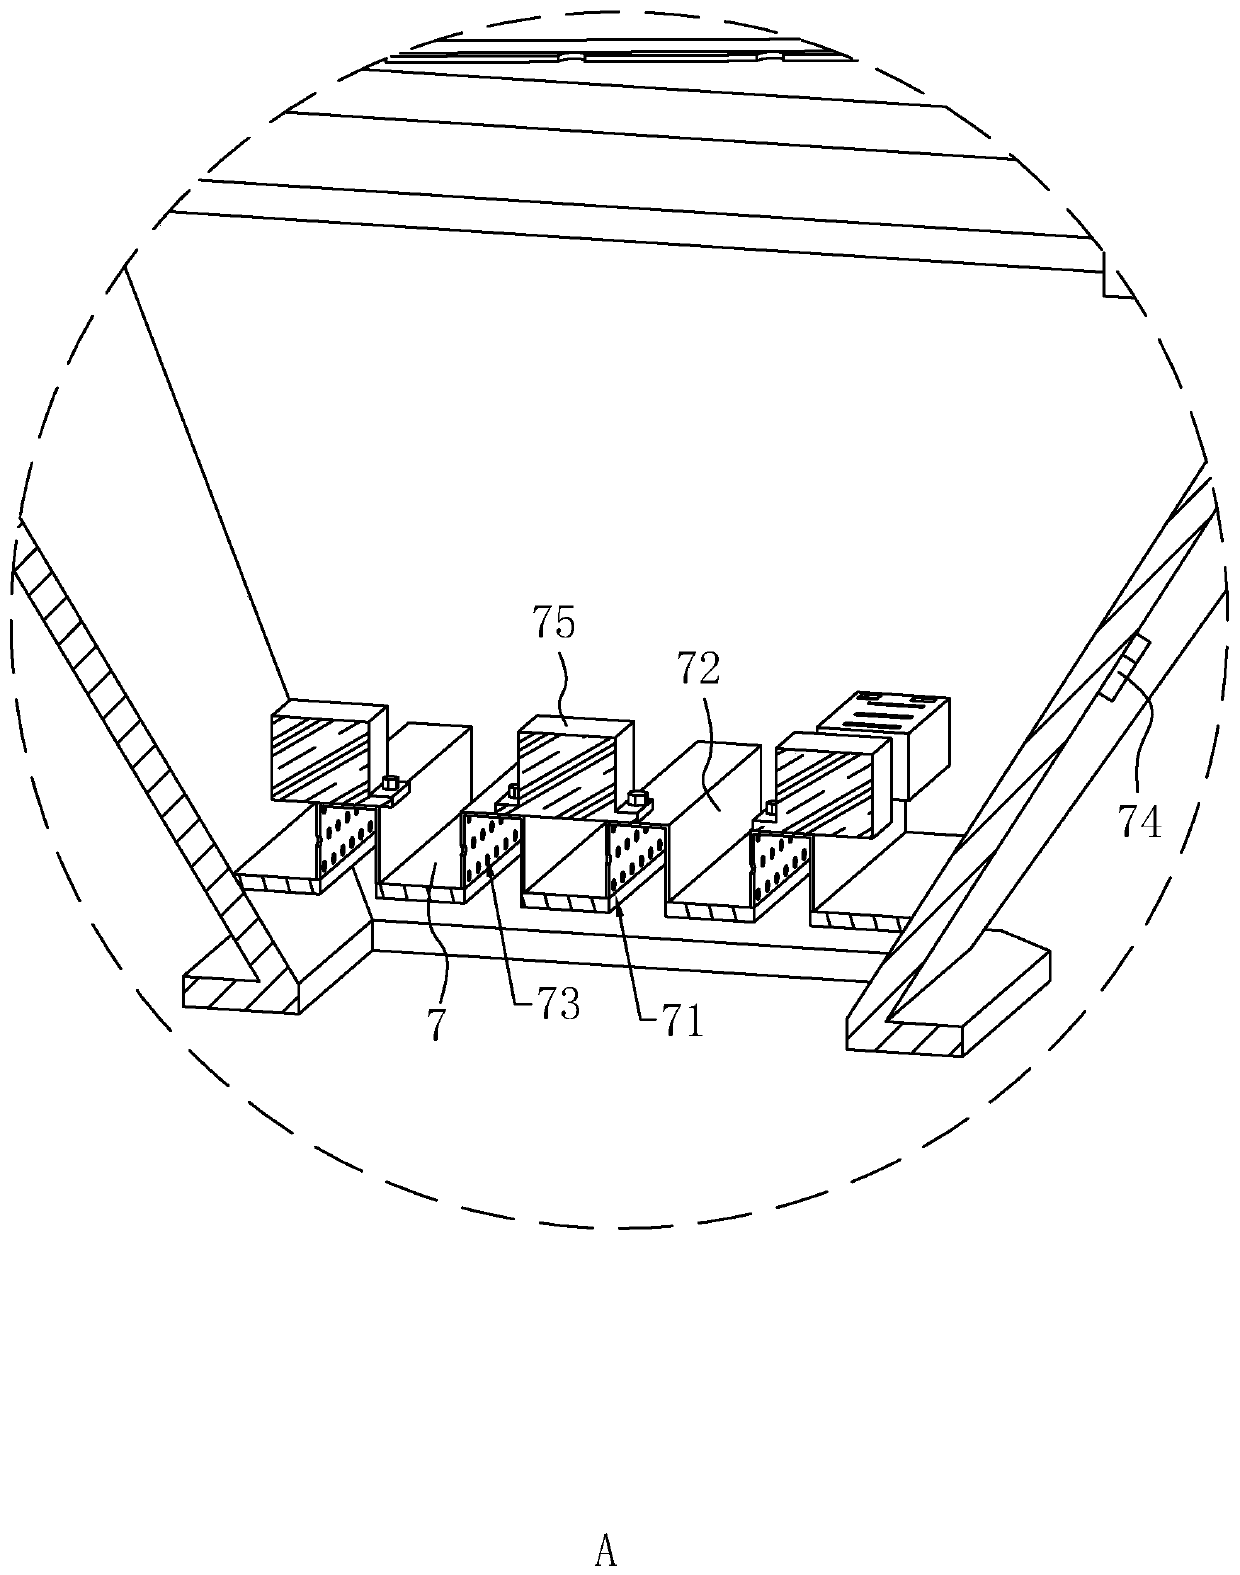 Chemical defense filtering absorber